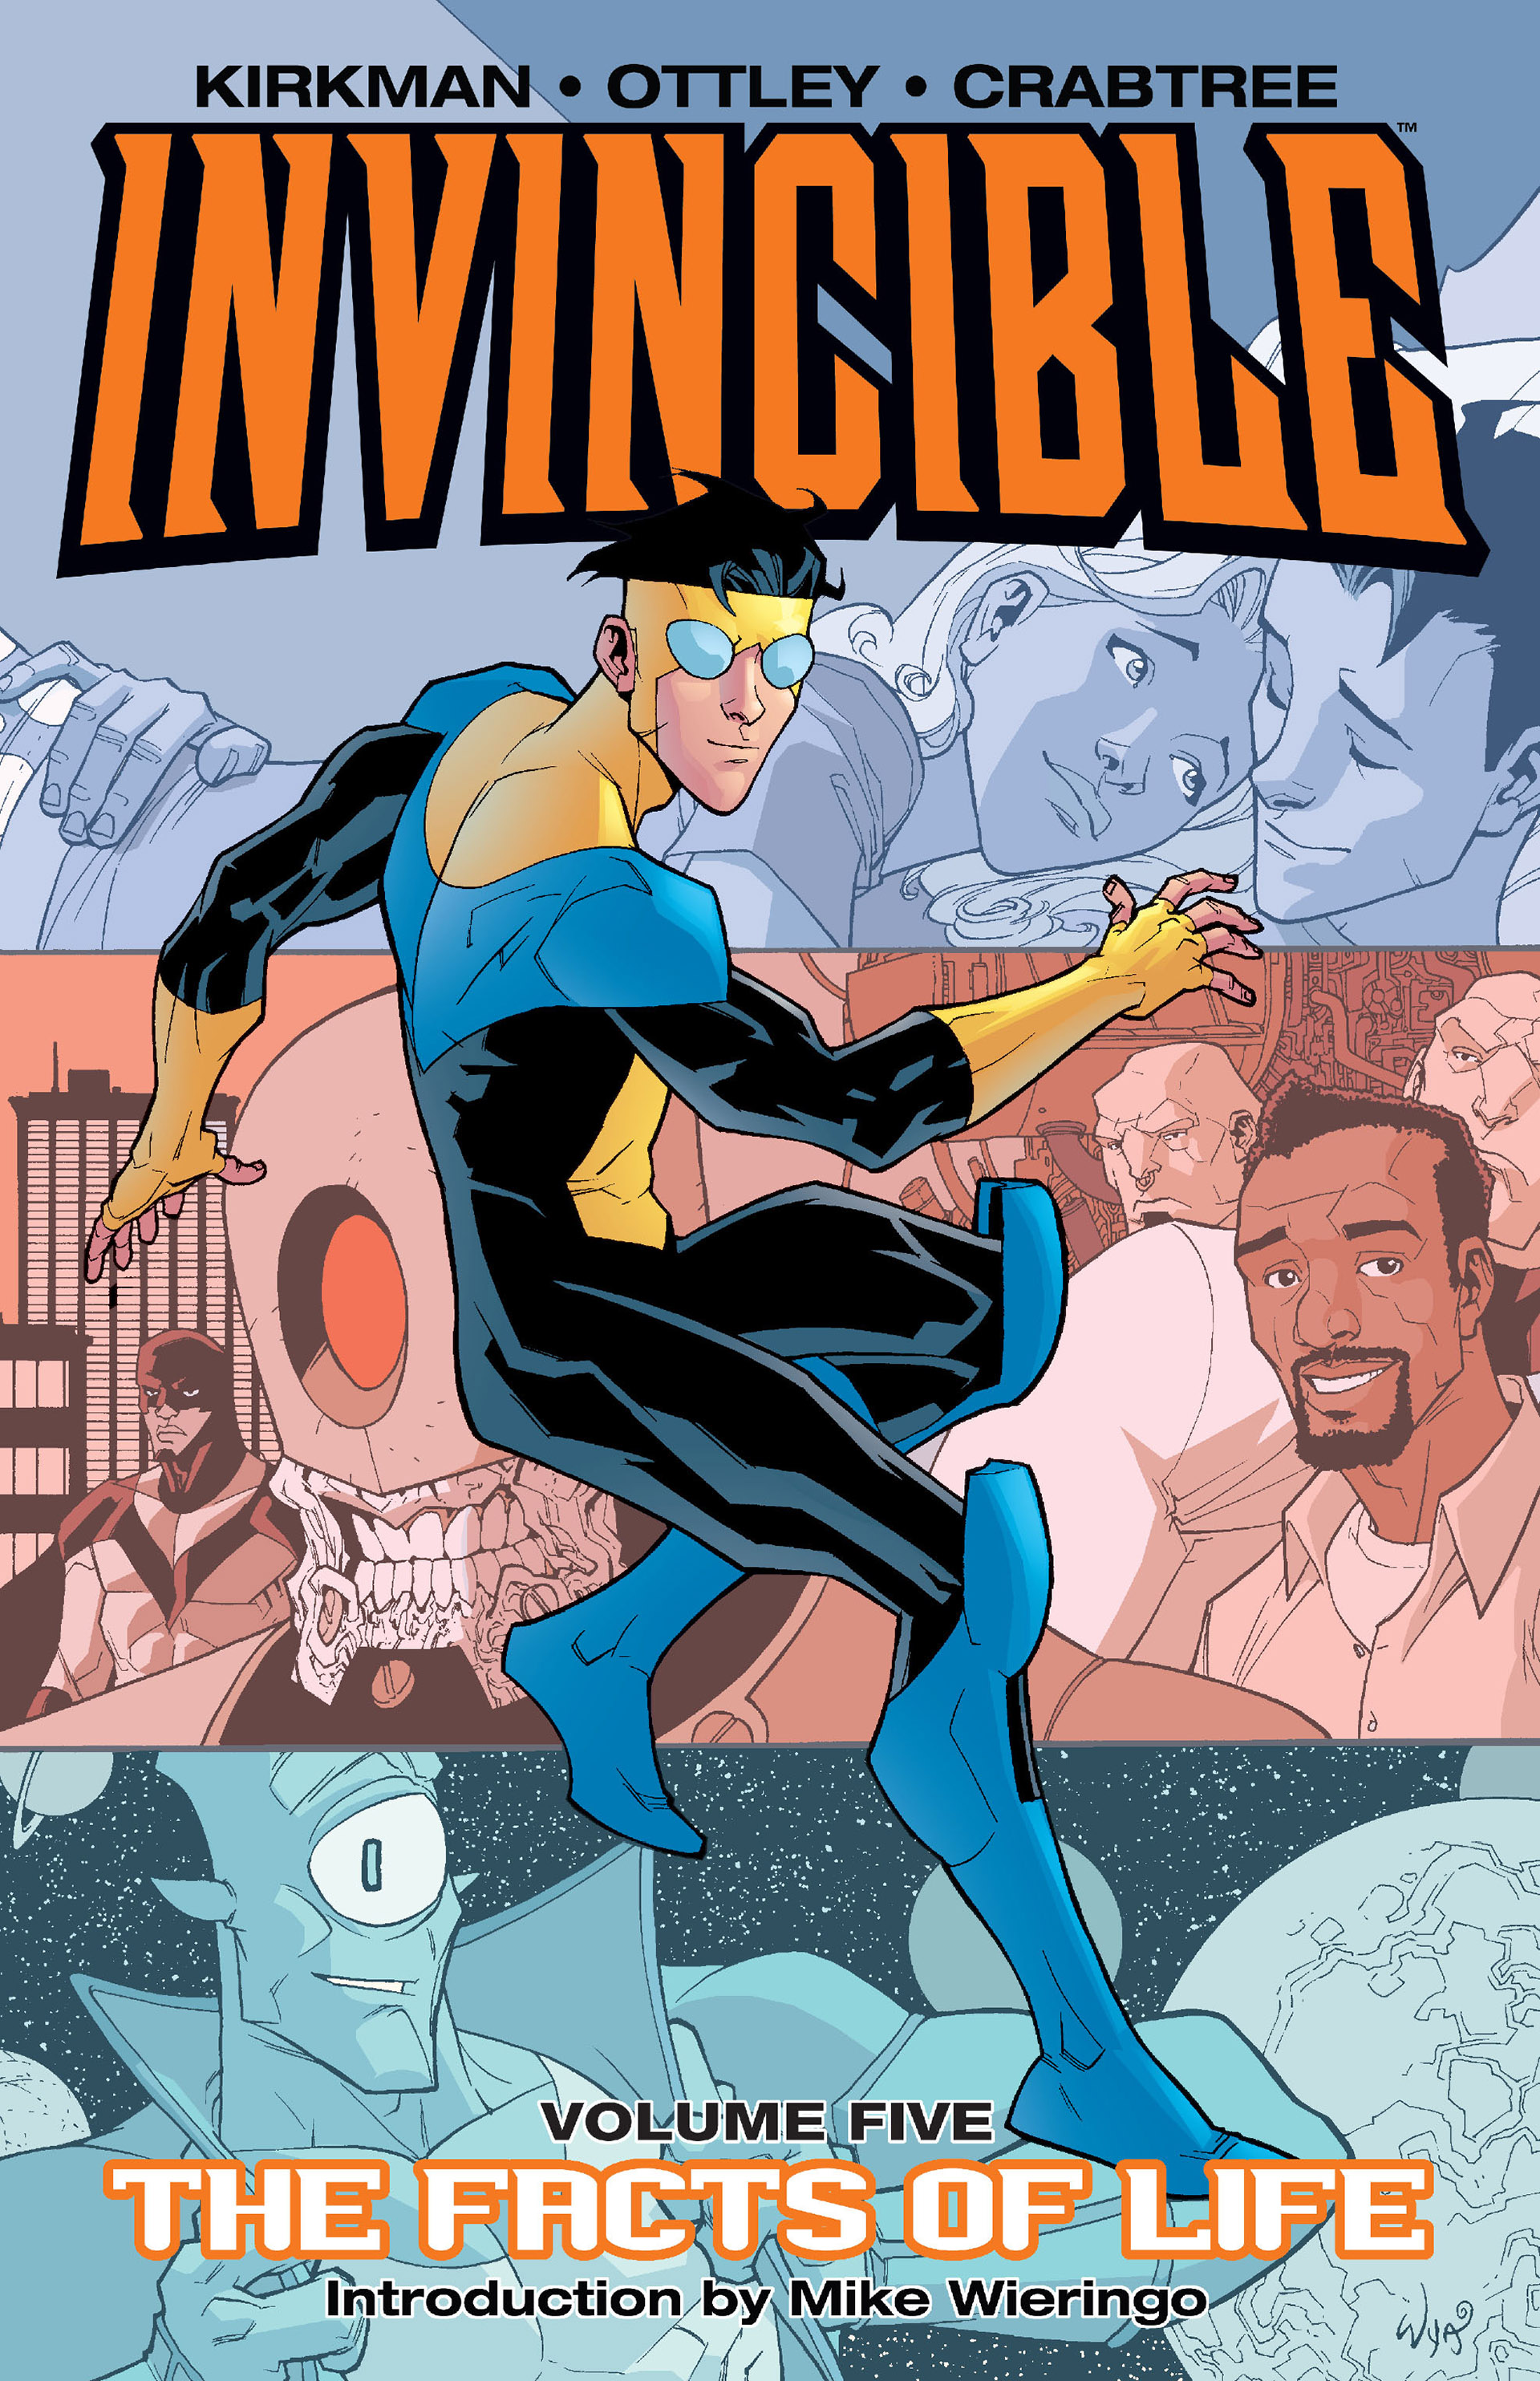 Read online Invincible comic -  Issue # _TPB 5 - The Facts of Life - 1